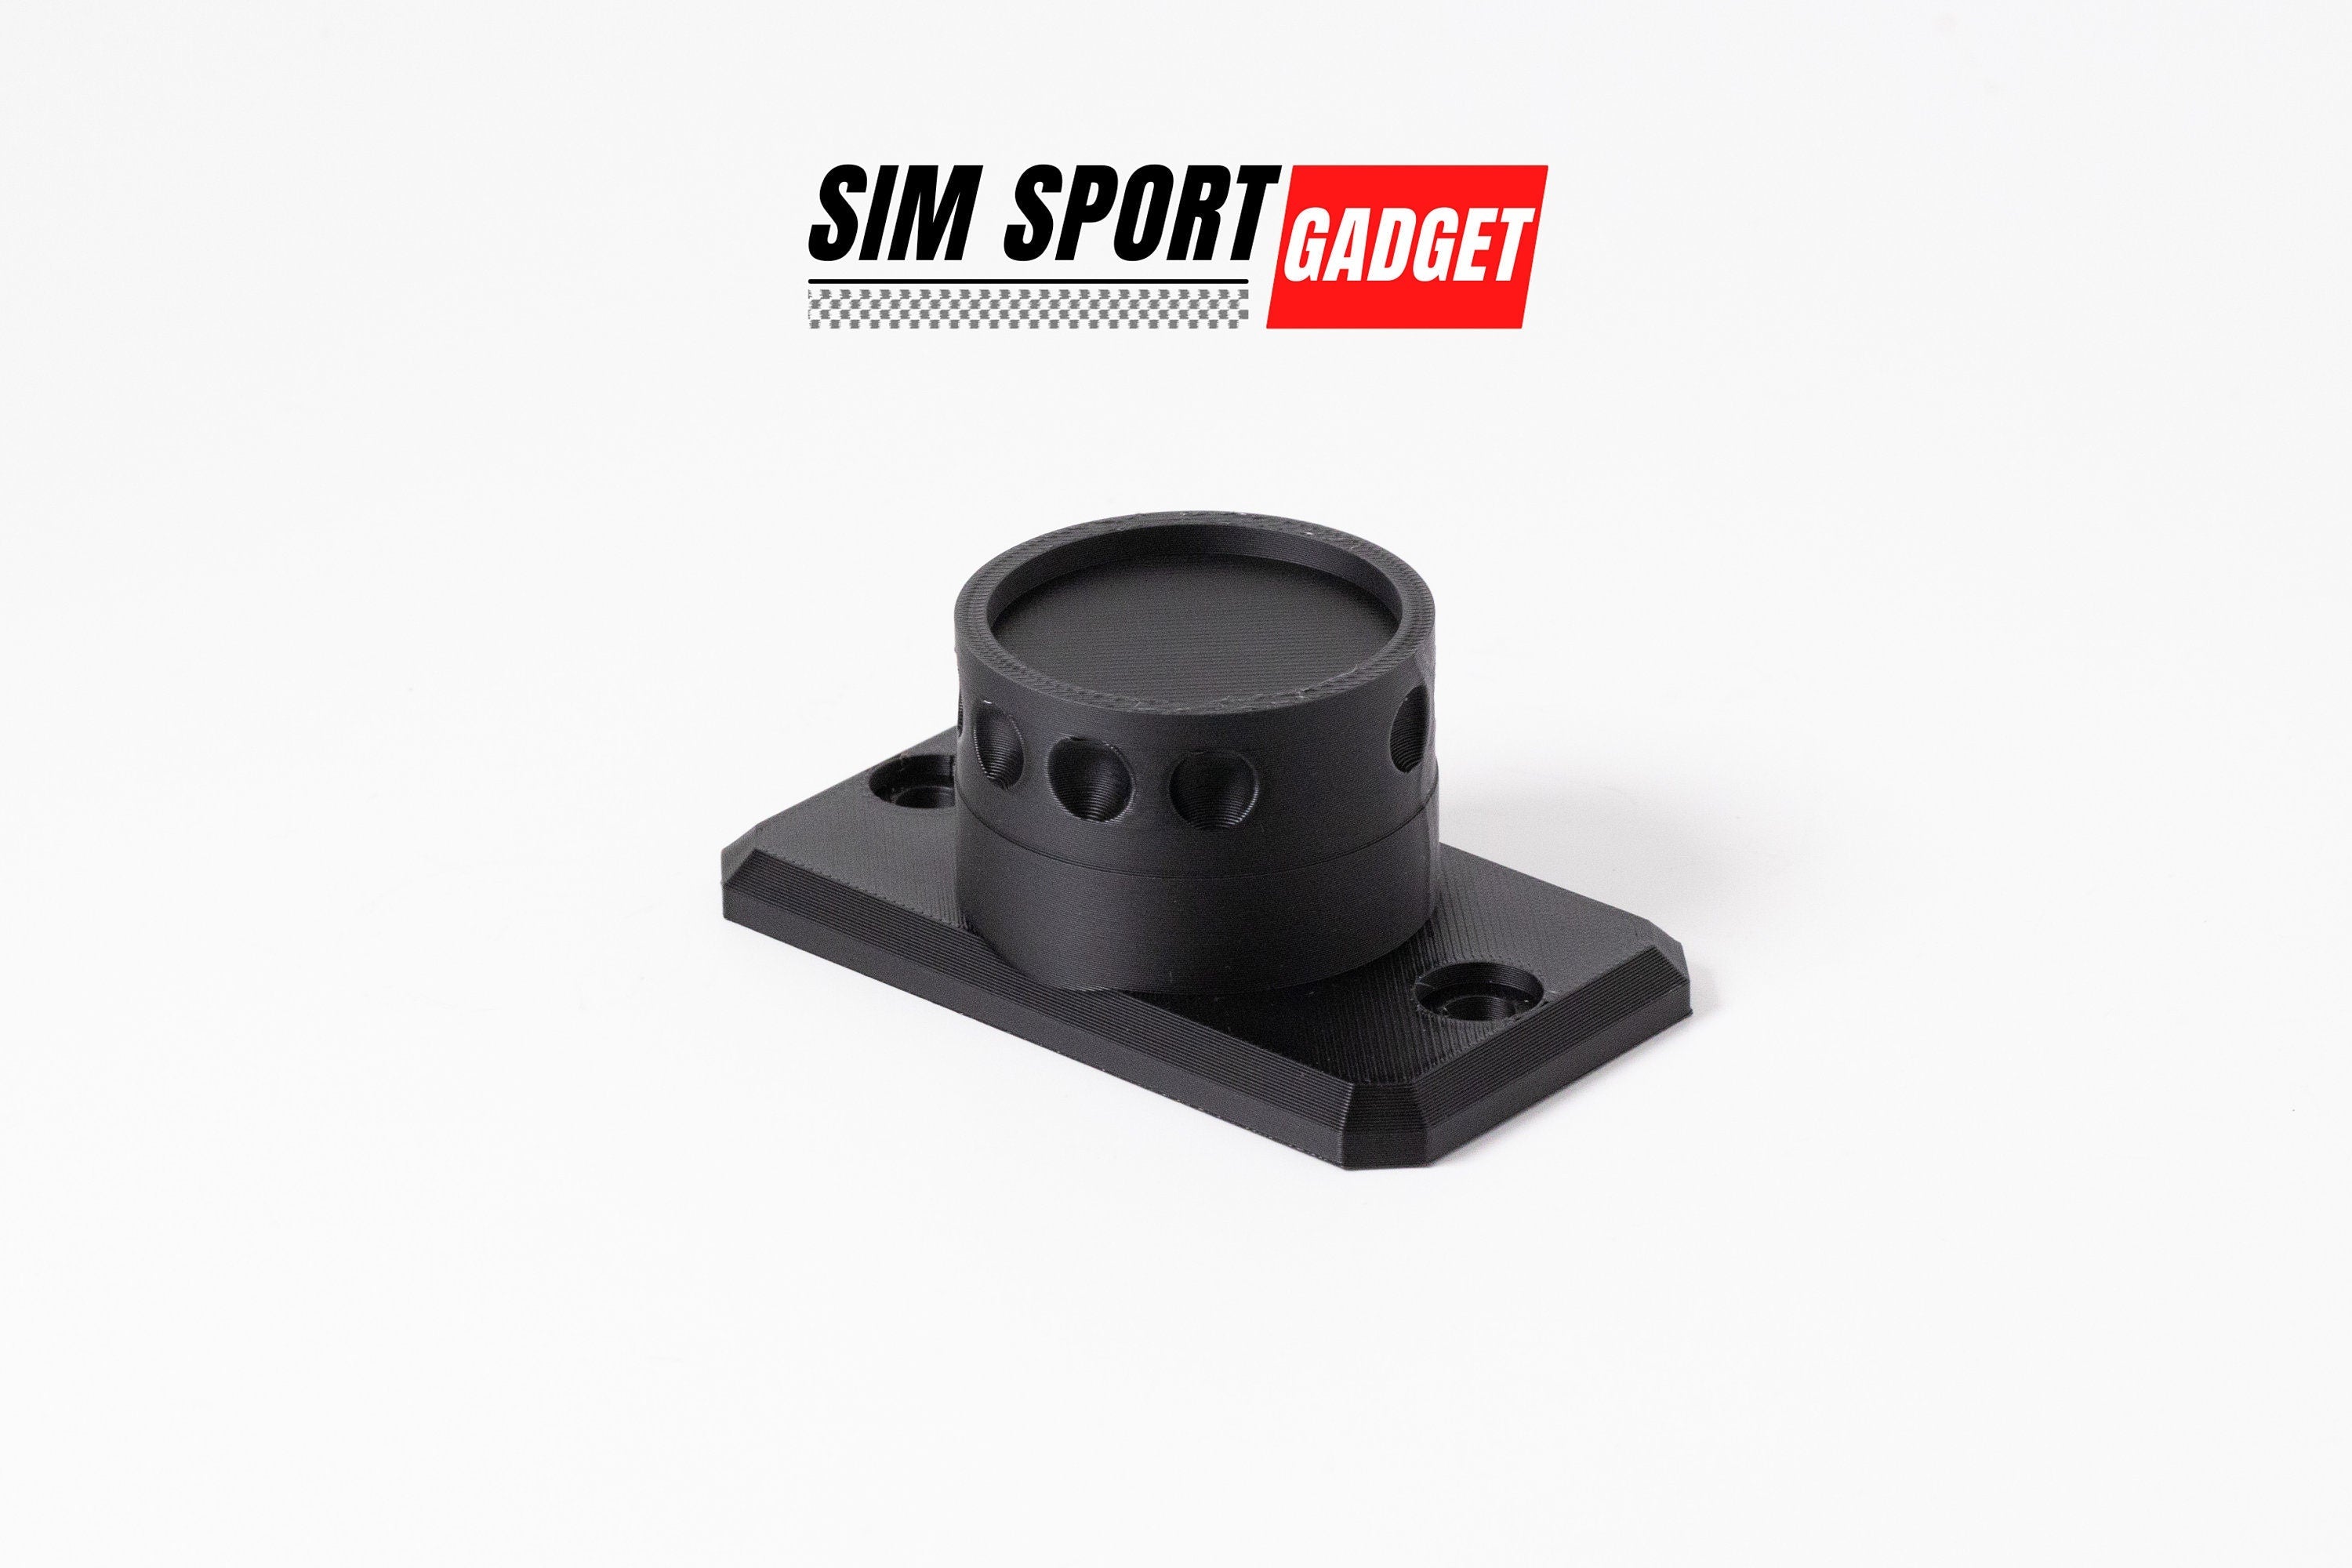 Wall Mount for Simagic Quick Release